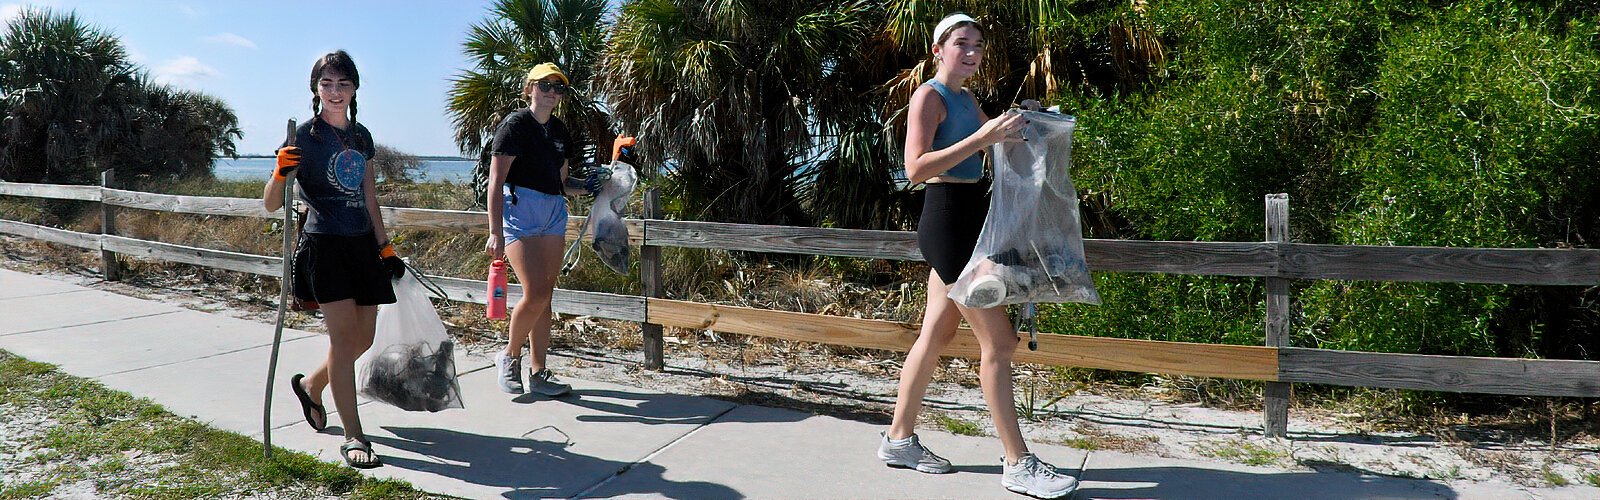 Encouraged by the International Coastal Cleanup campaign to volunteer and make a difference in their local communities, three young women return from the beach cleanup with bags of litter to be weighed.